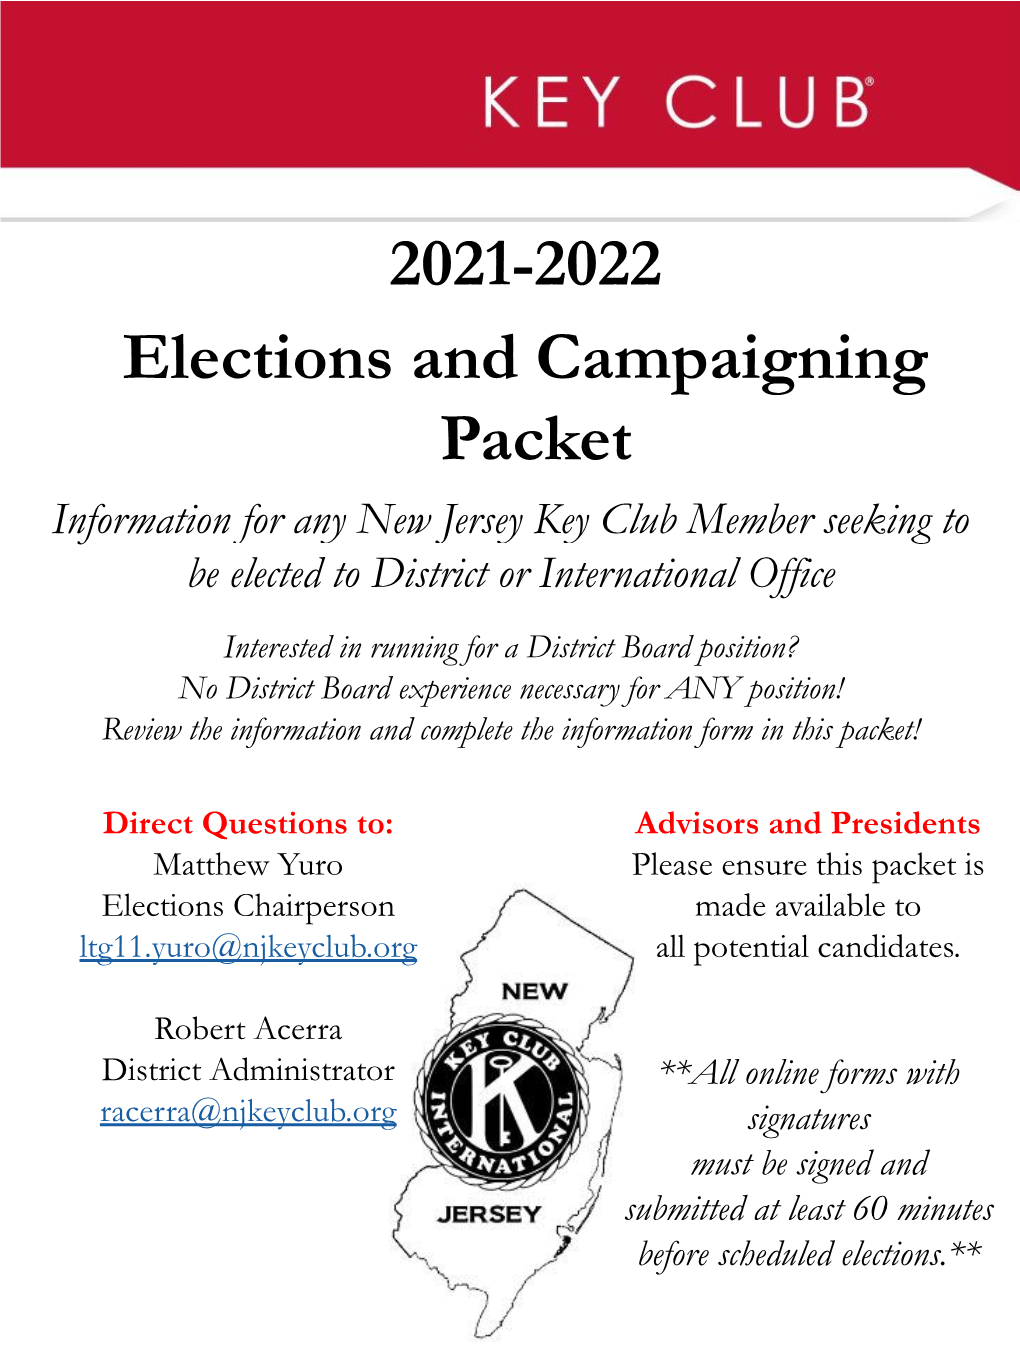 2021-2022 Elections and Campaigning Packet